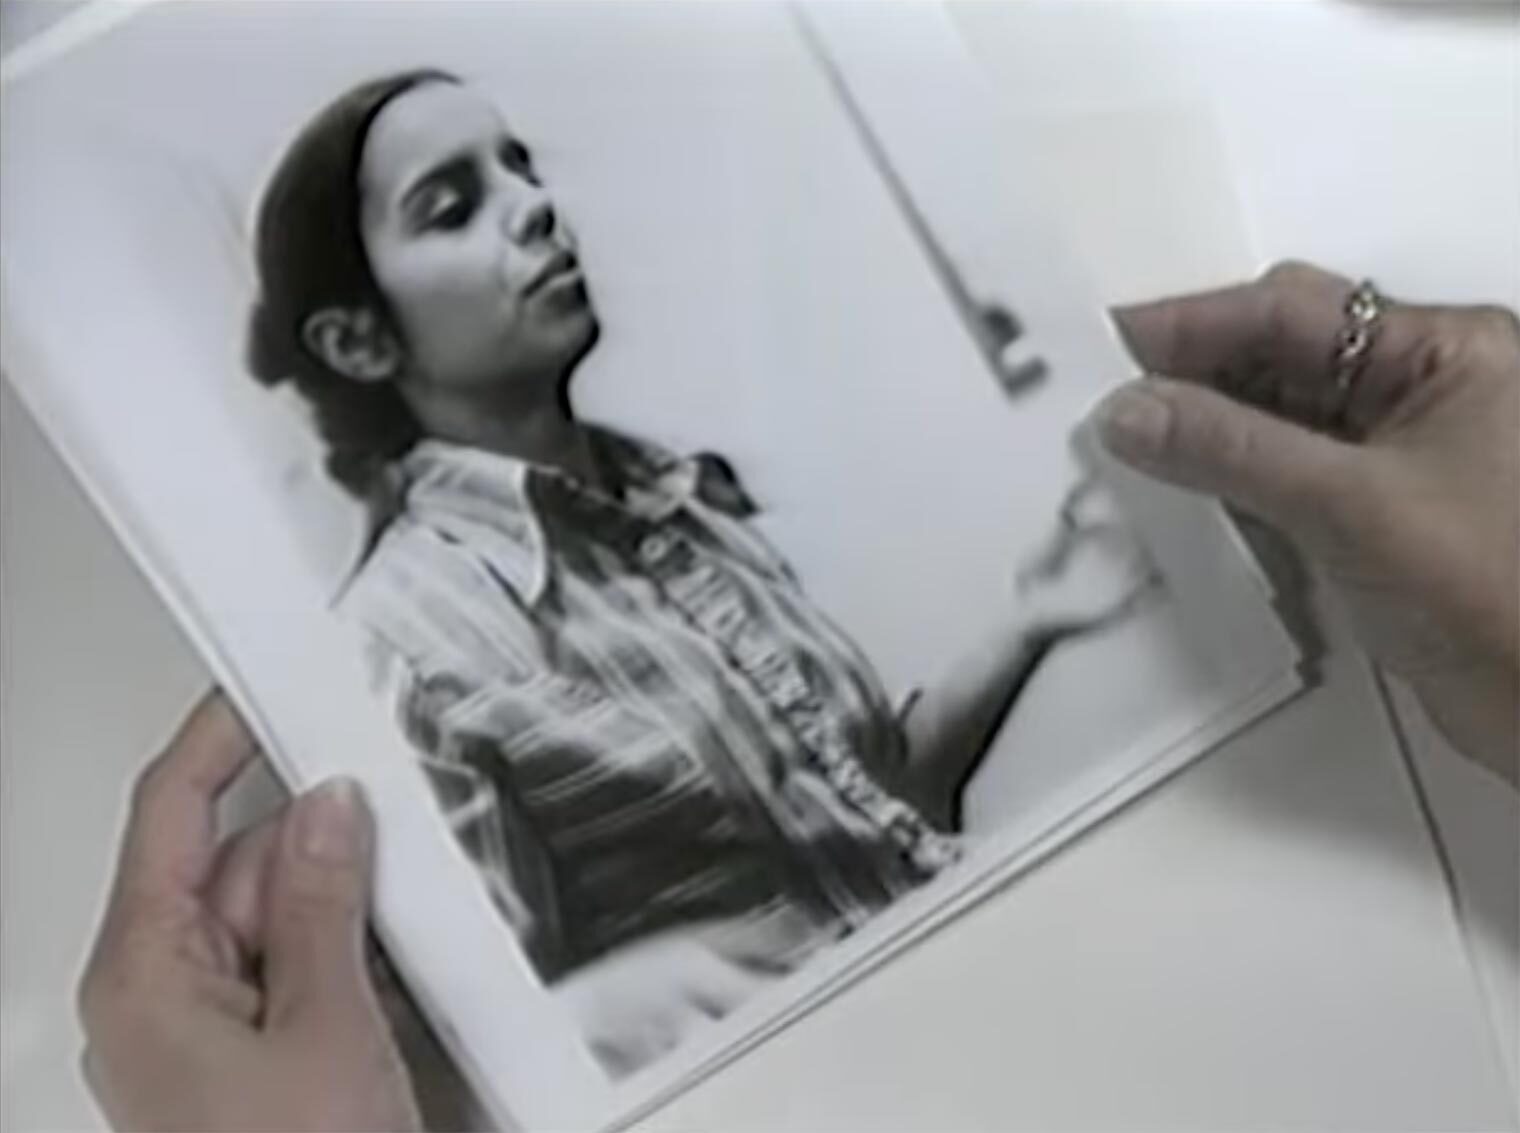 A film still of a person holding a photograph of Mendieta